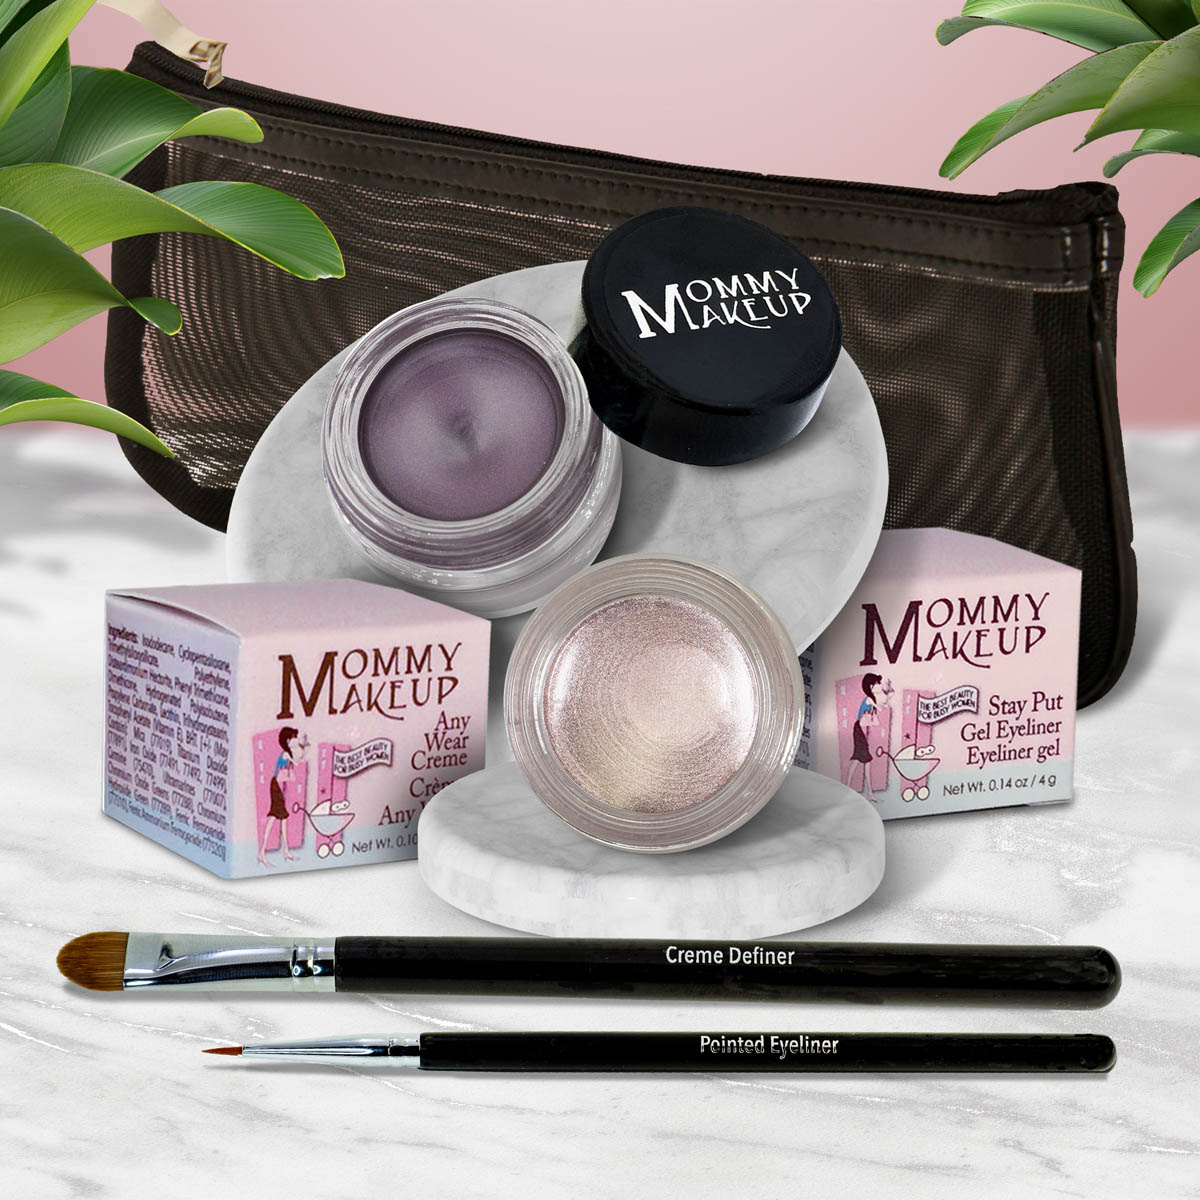 5 piece waterproof eye makeup set. Eyeliner, Eye shadow, brushes. Allergy tested, cruelty free. Made in USA. Crystal - A Pale Shimmering Pewter and Amethyst - Deep eggplant